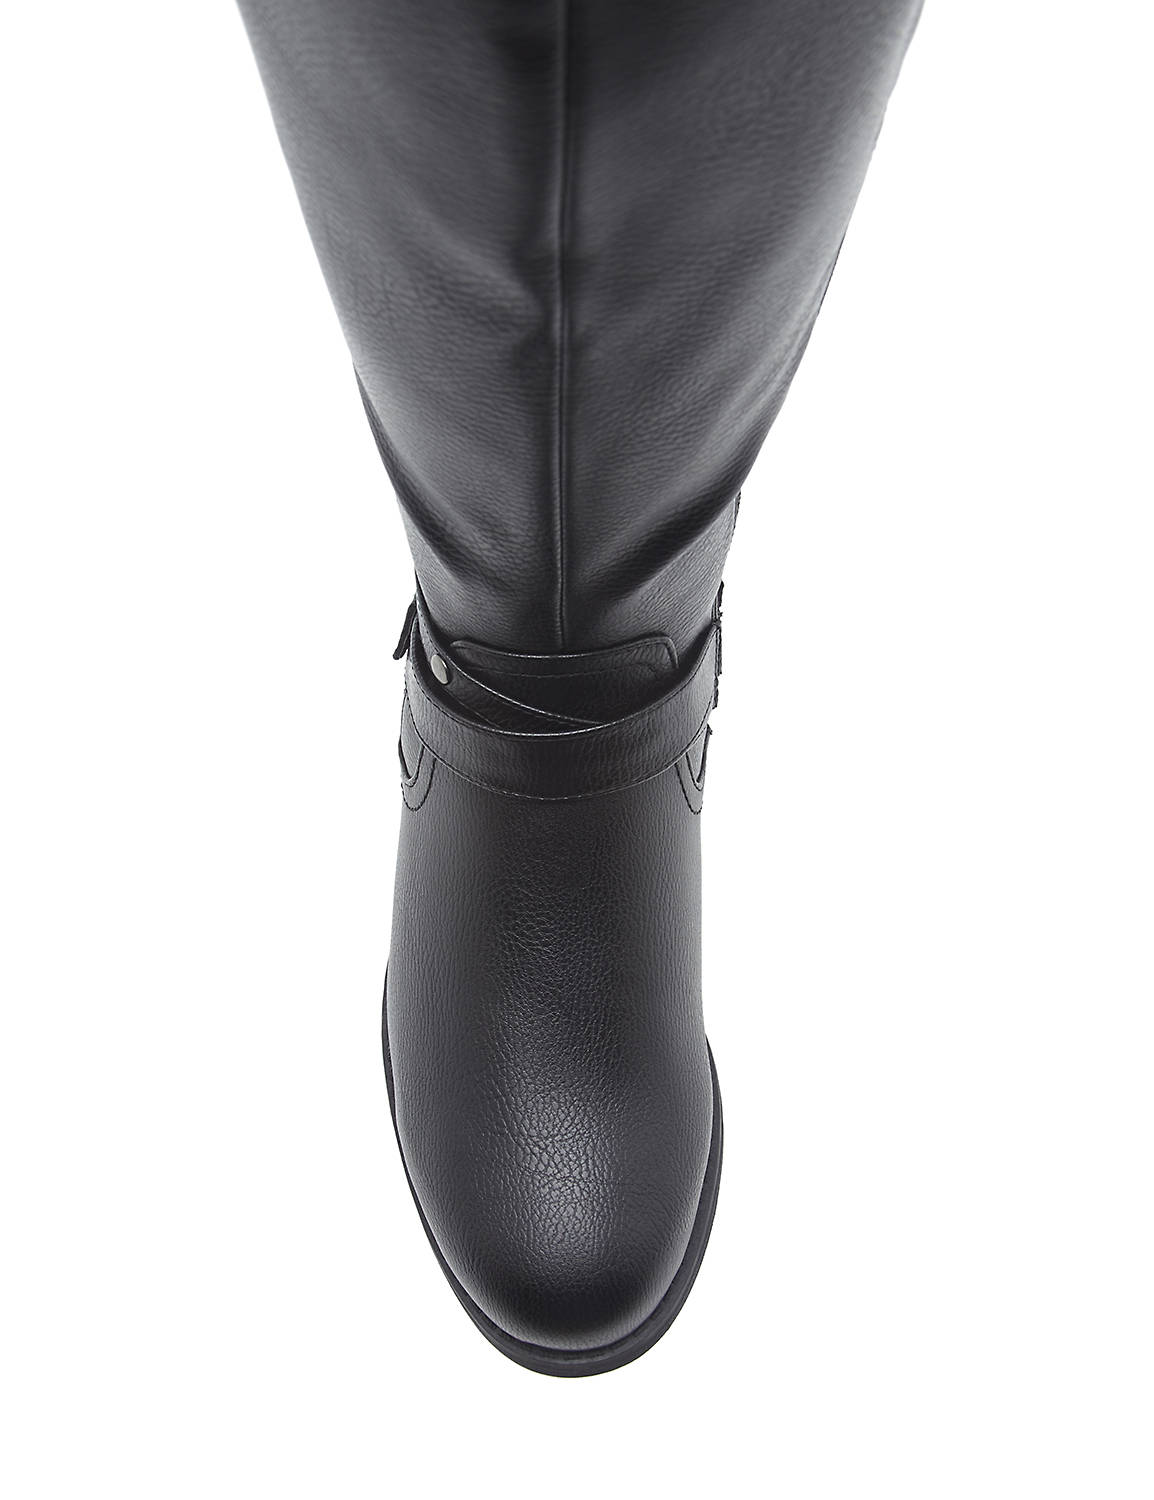 ZIPPER DETAIL RIDING BOOT Product Image 6